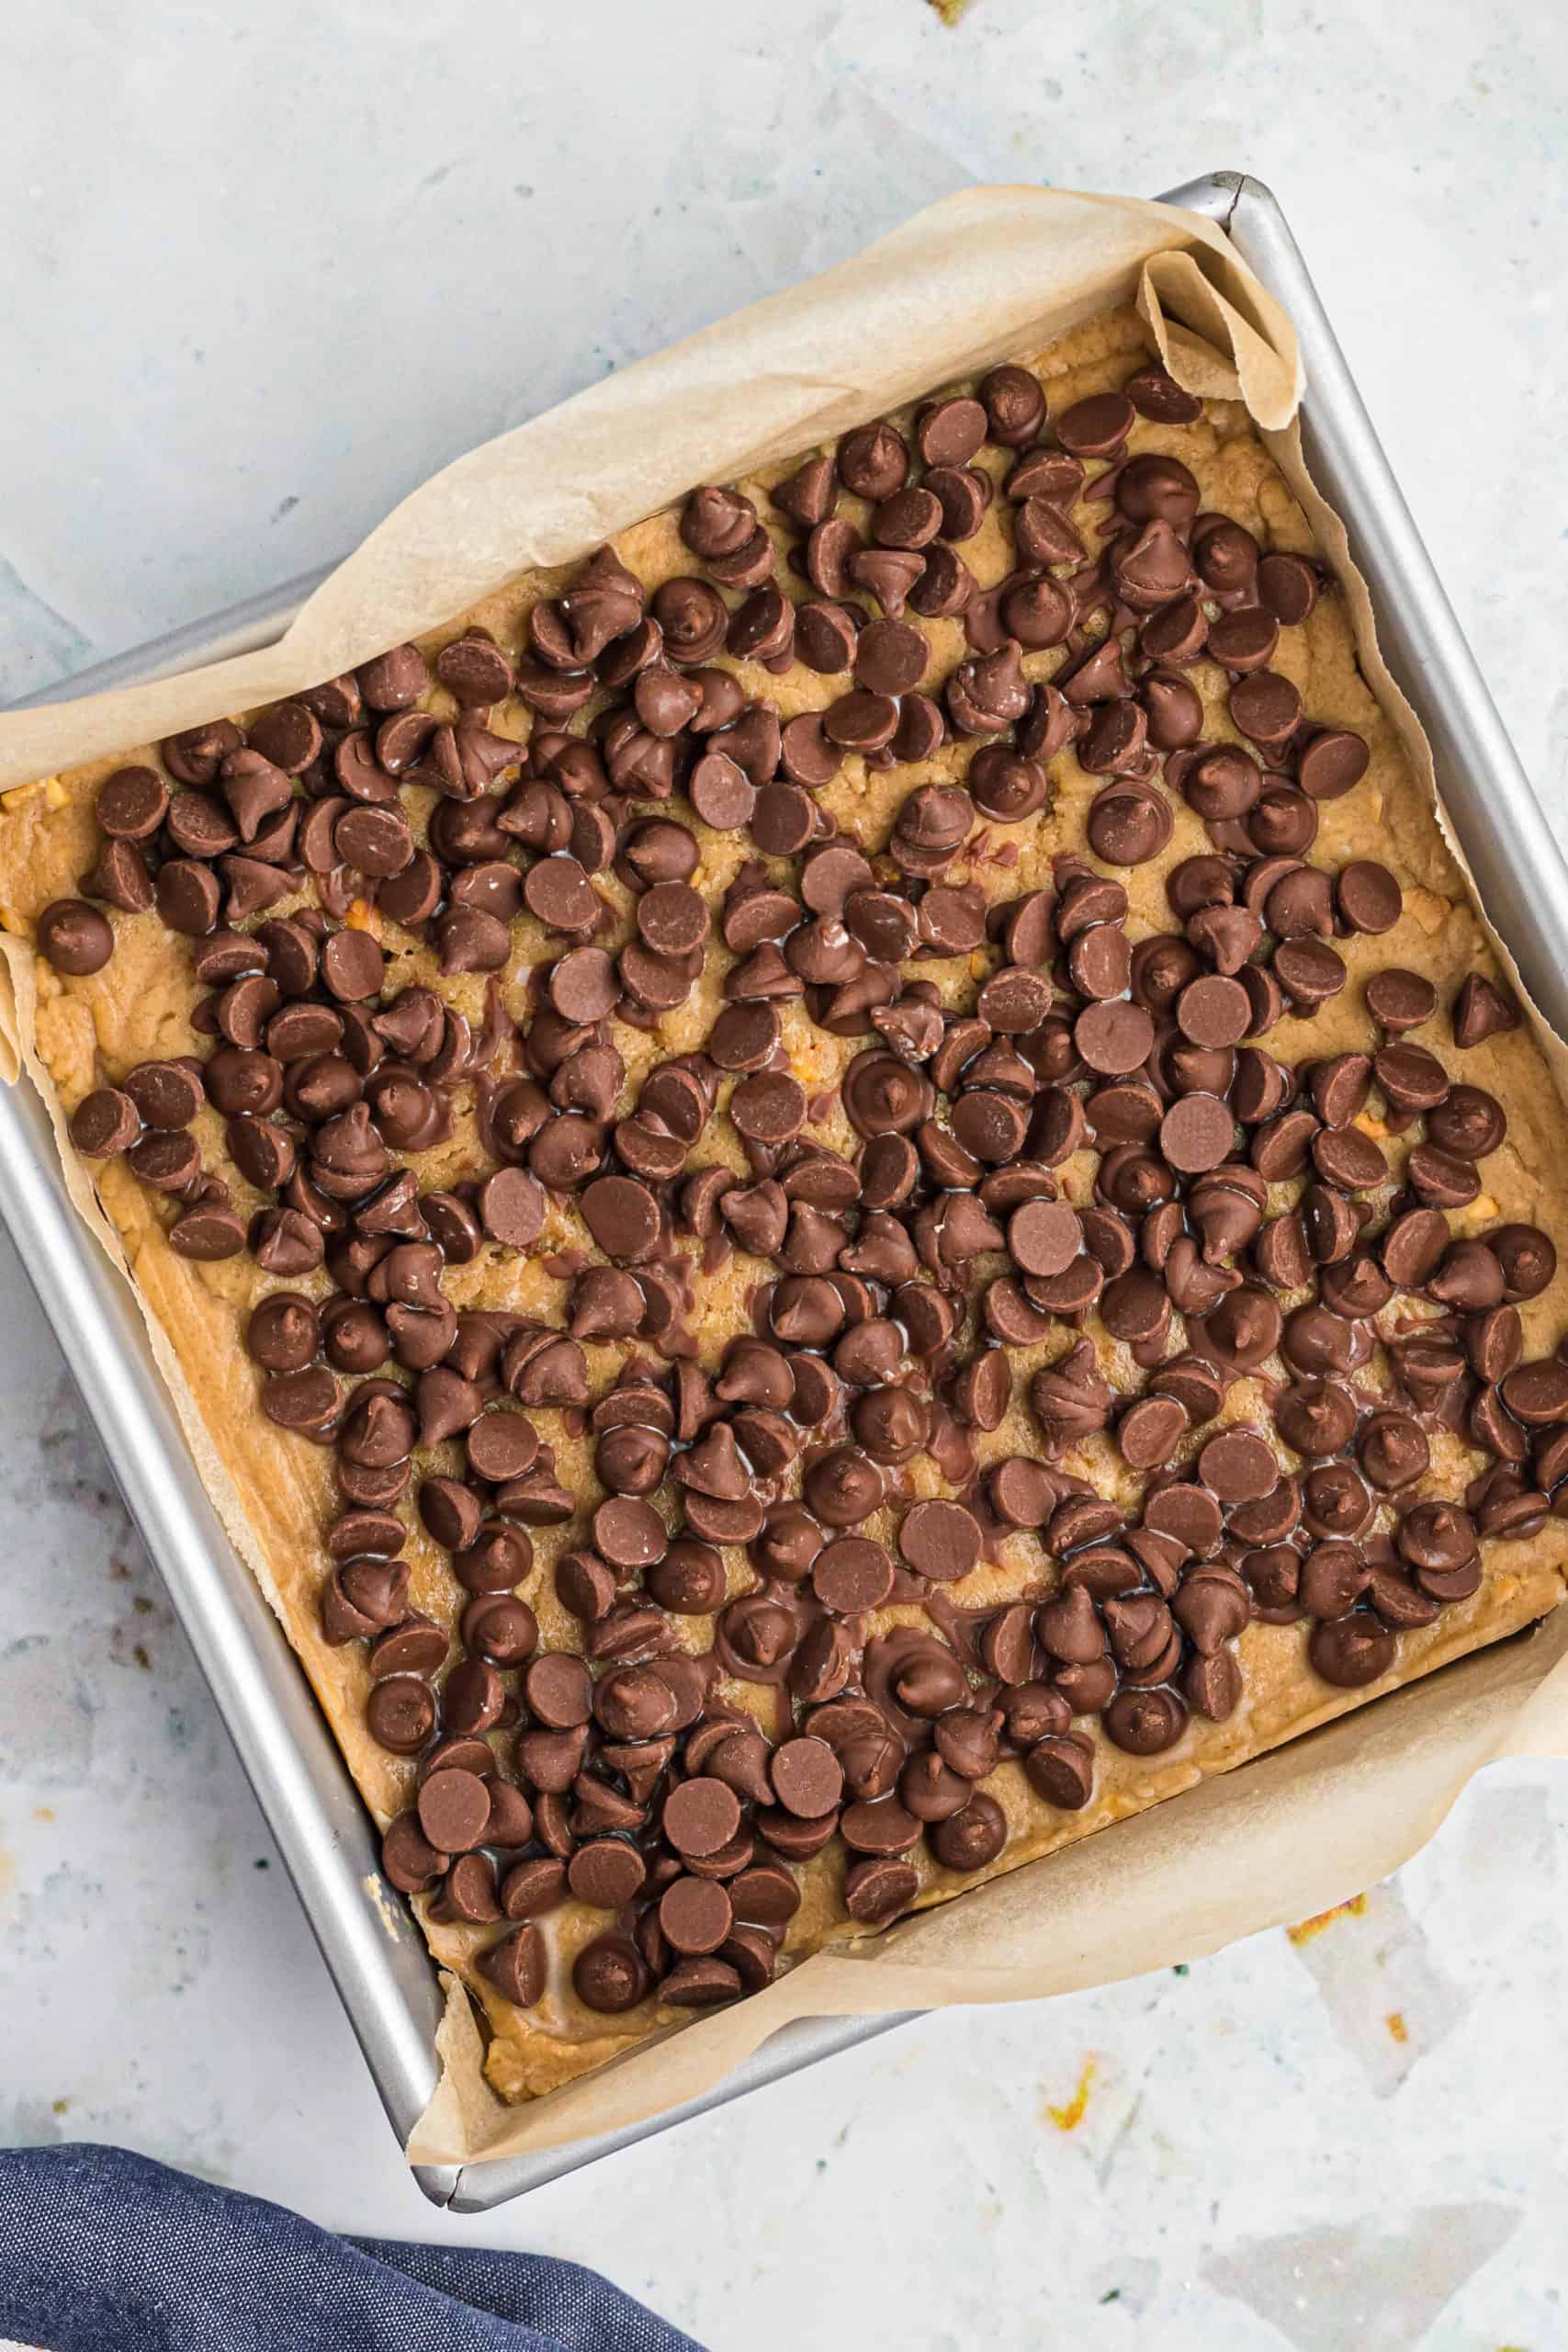 chocolate chips evenly sprinkled on top of peanut butter fudge in a baking pan.